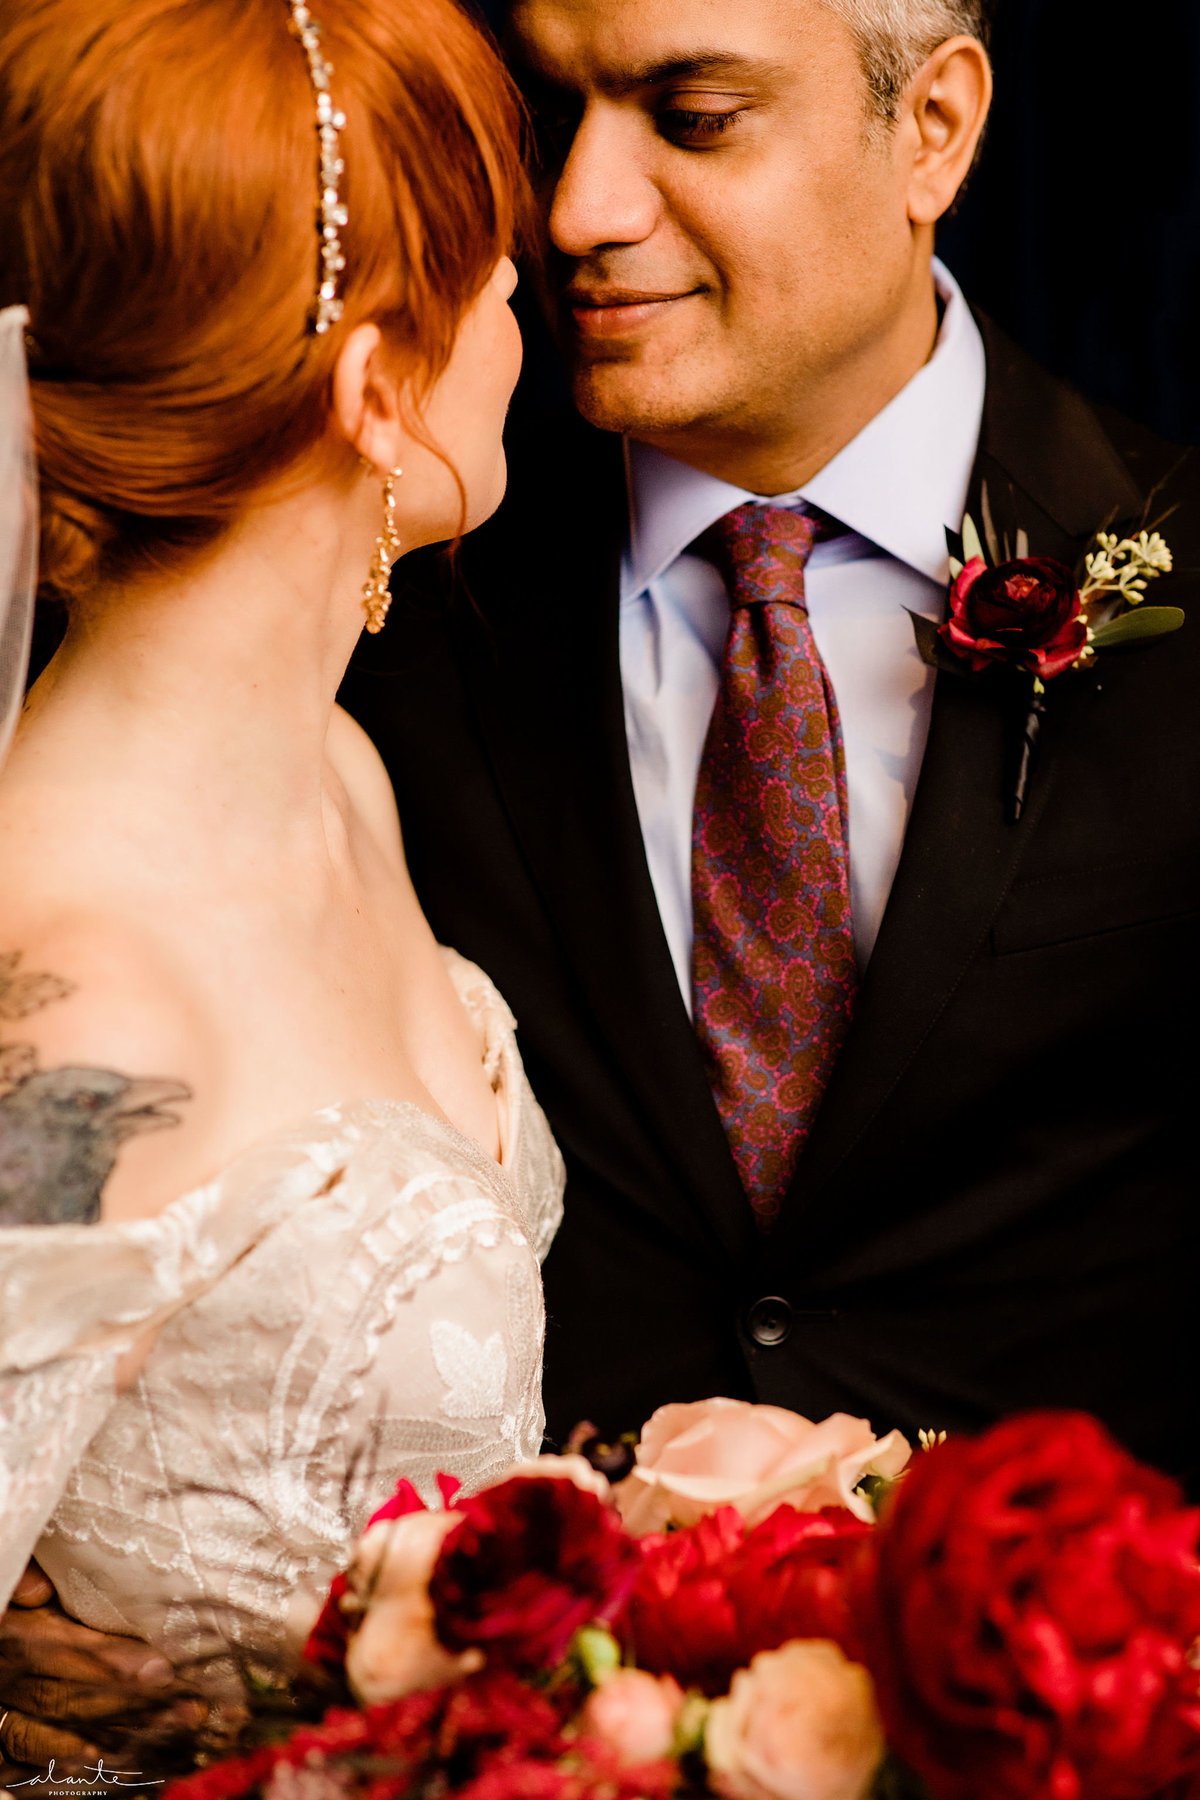 Groom looking at bride holding deep red bridal bouquet